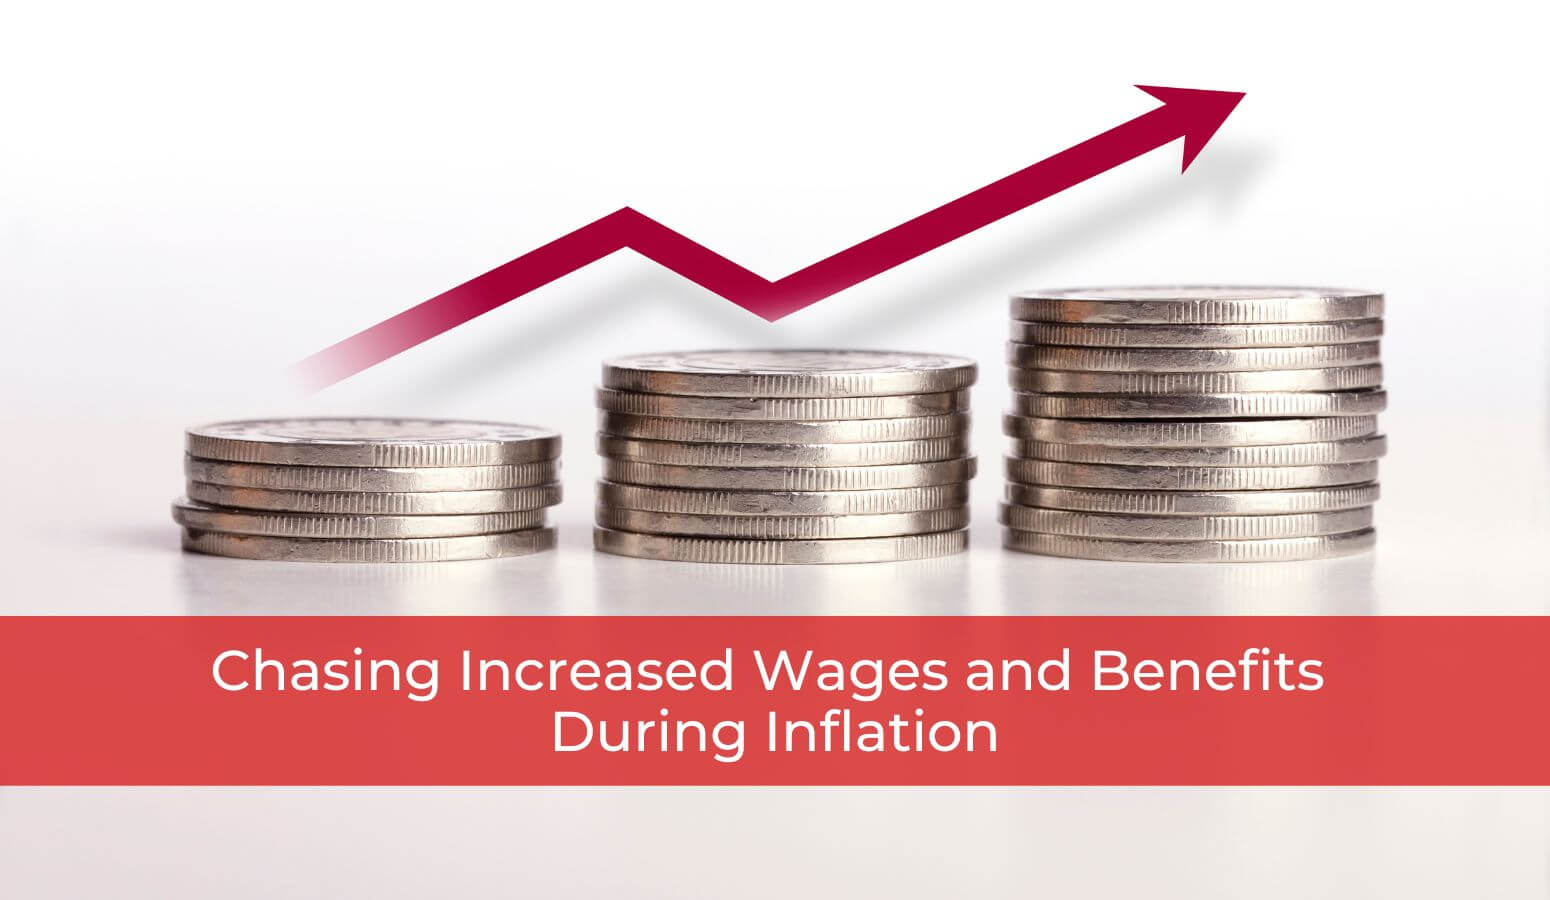 Benefits during Inflation